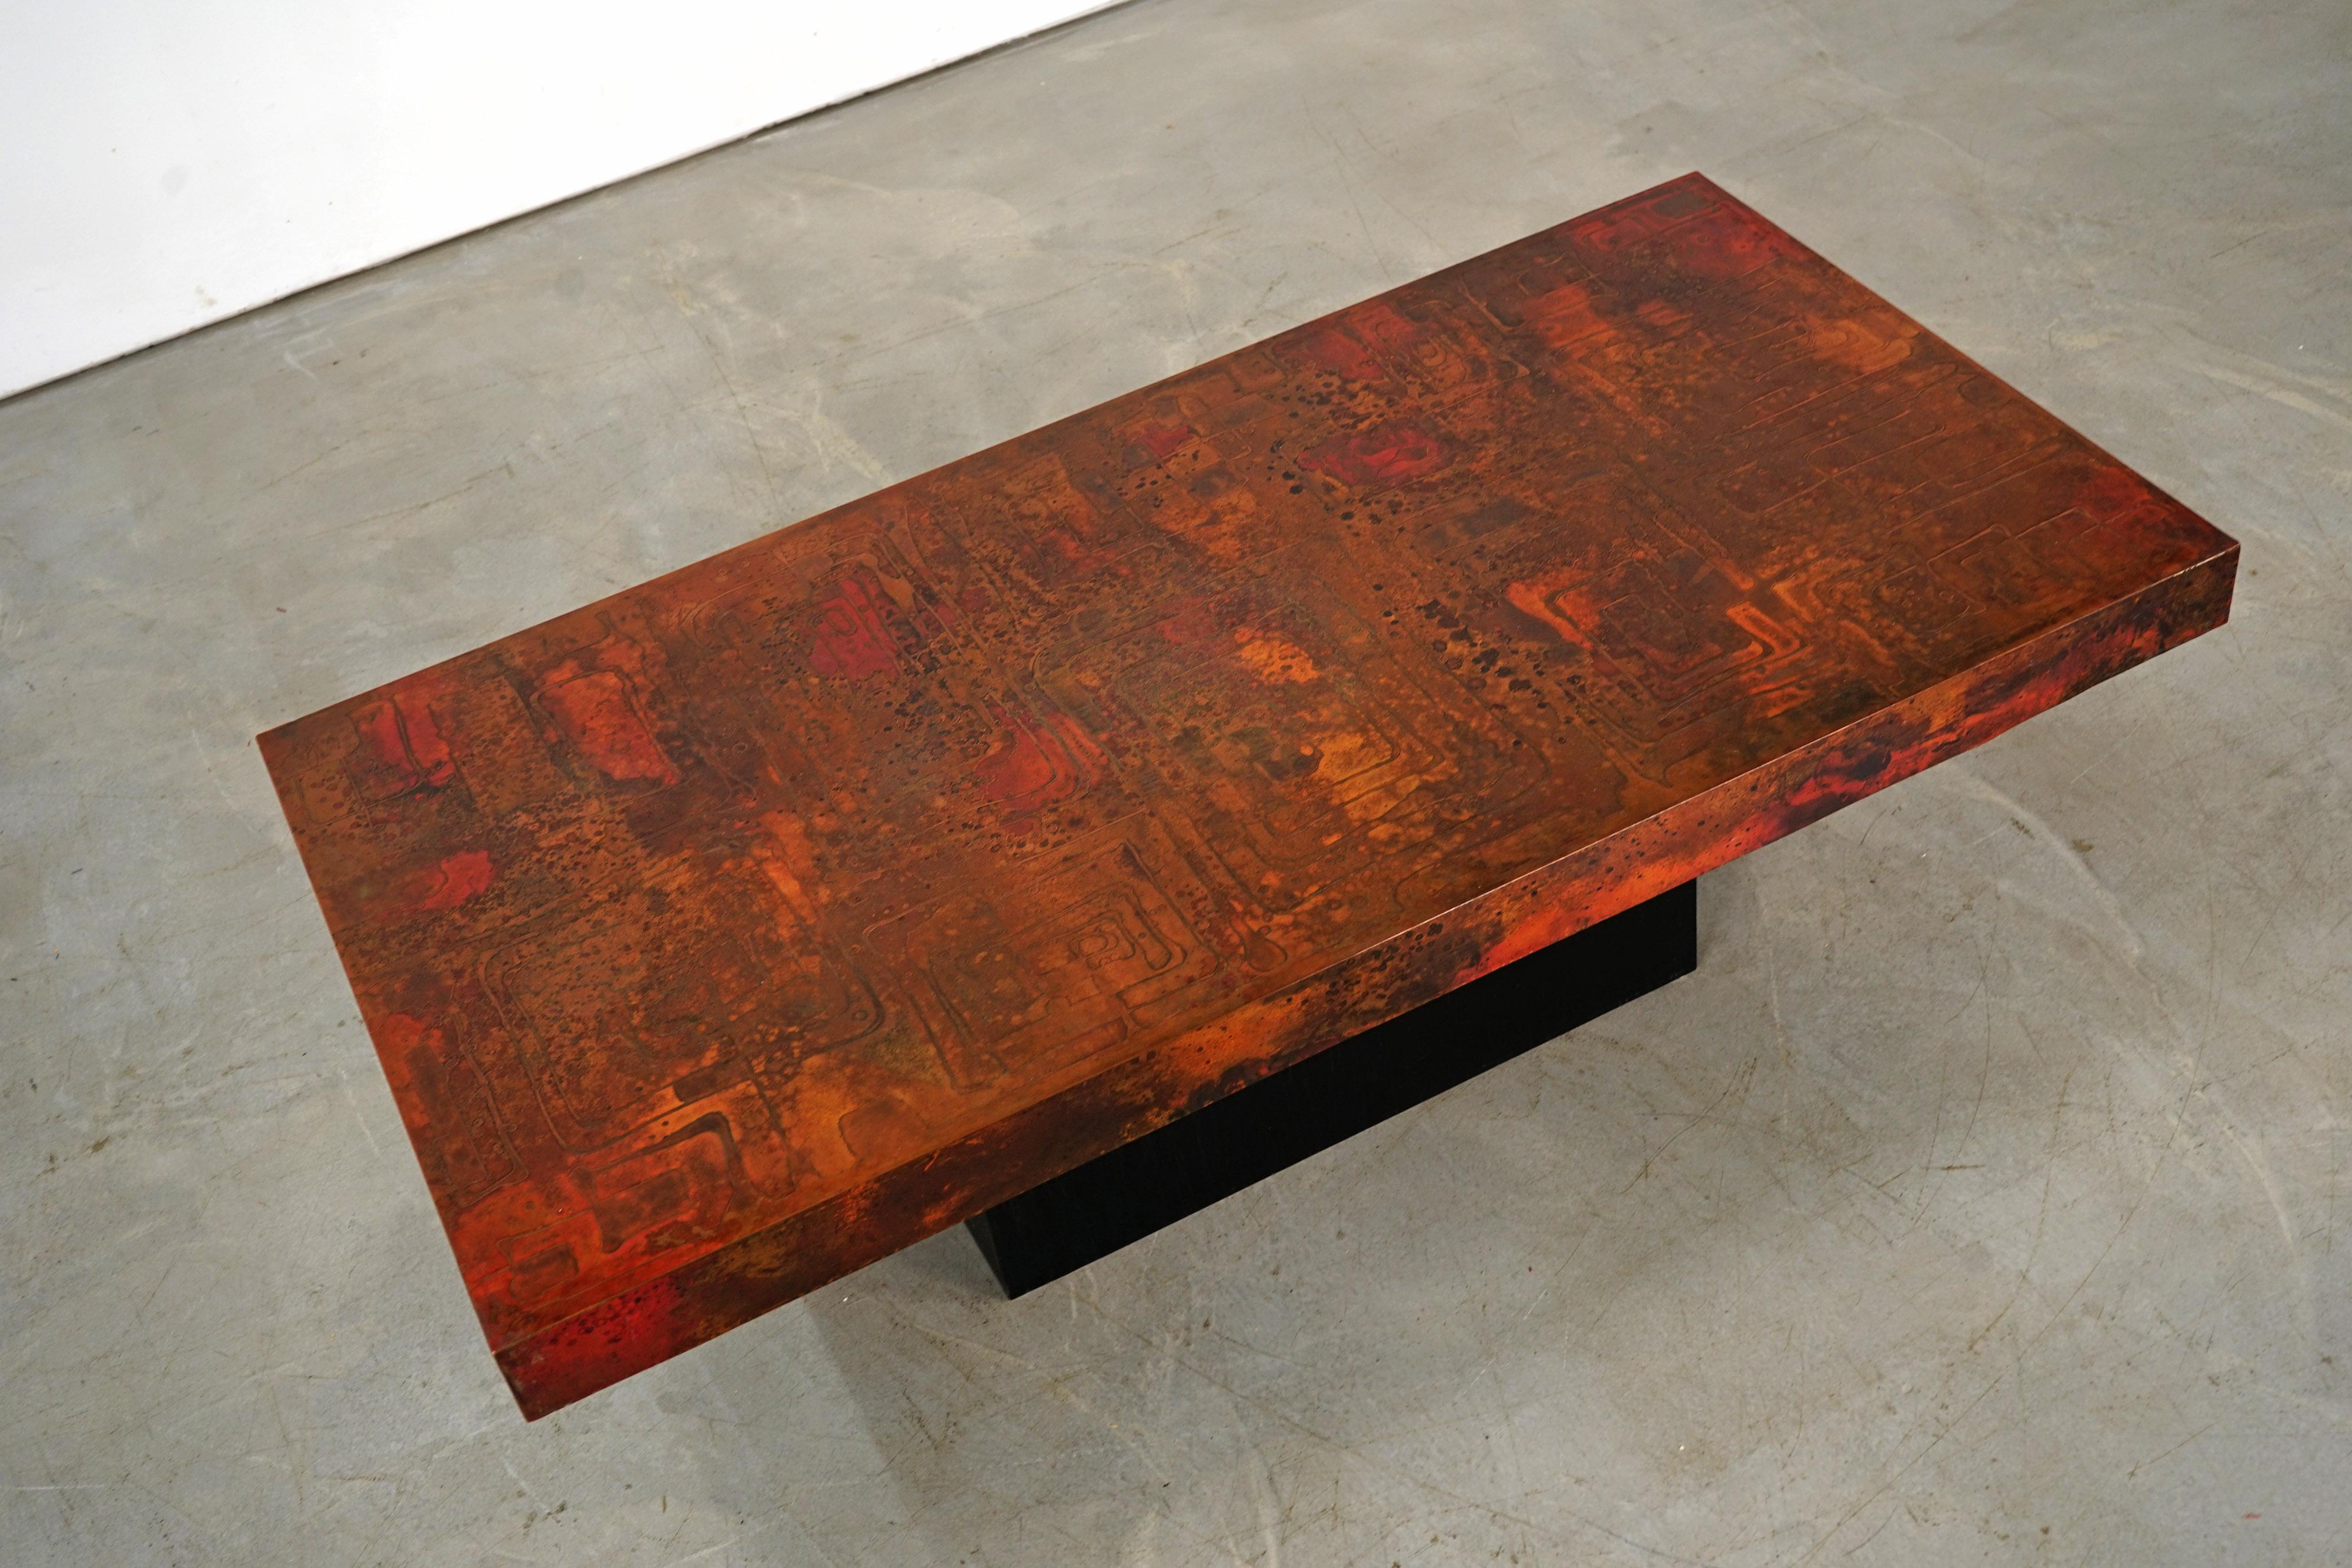 20th Century Etched and Fire Oxidized Copper Coffee Table by Bernhard Rohne, 1960s For Sale